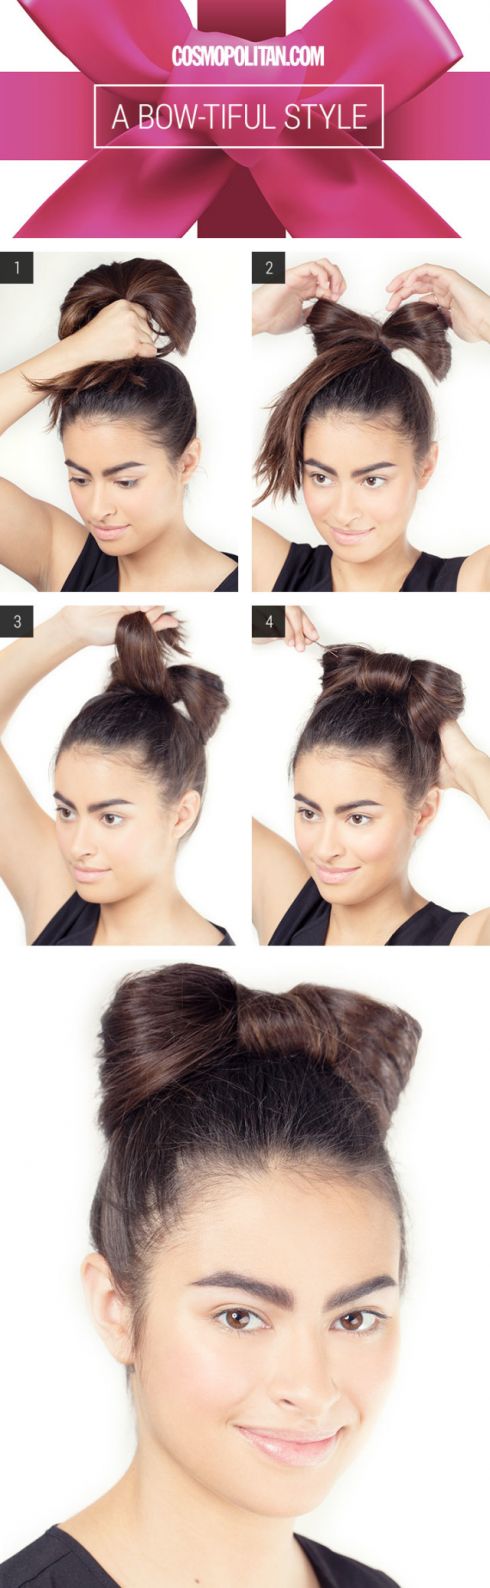 9744_53a0caf6e76ce_-_cosmo-infographic-bow-hair.jpg (92.87 Kb)